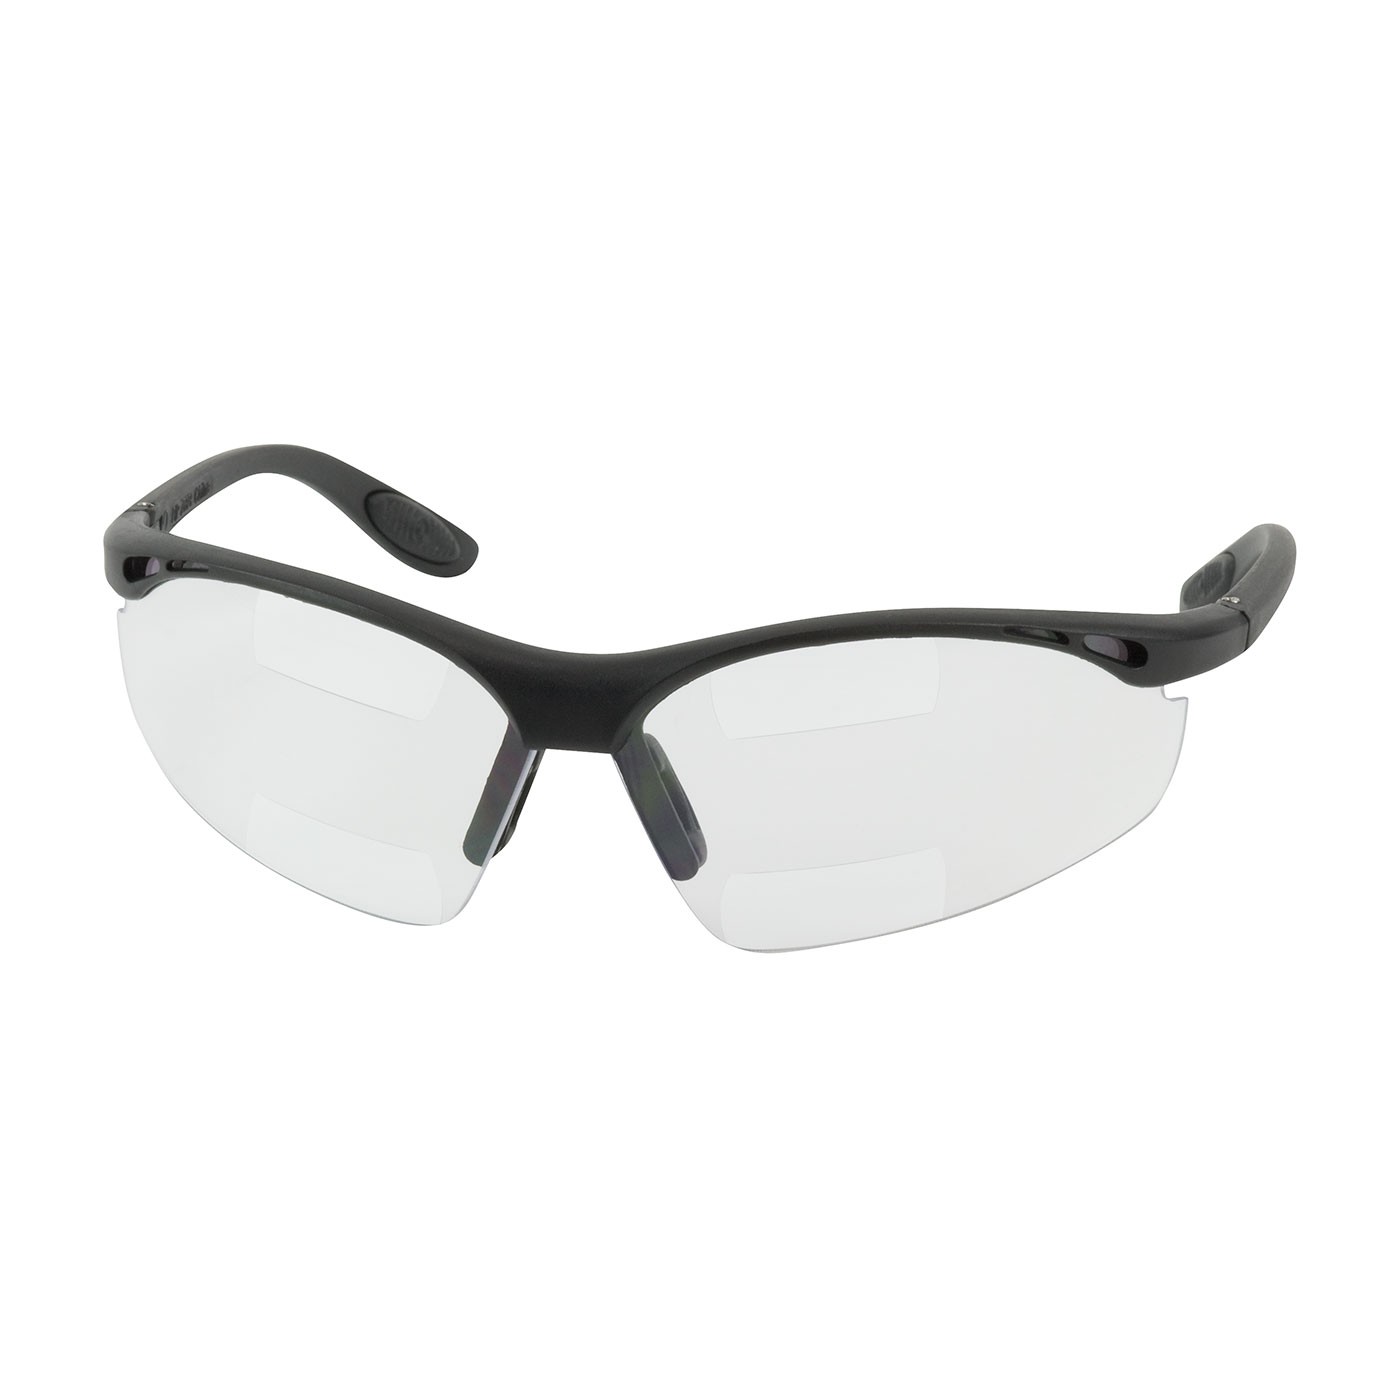 Double Mag Readers™ Semi-Rimless Safety Readers with Black Frame, Clear Lens and Anti-Scratch / Anti-Fog Coating, Dual 2.00 Diopter  (#250-25-2020)